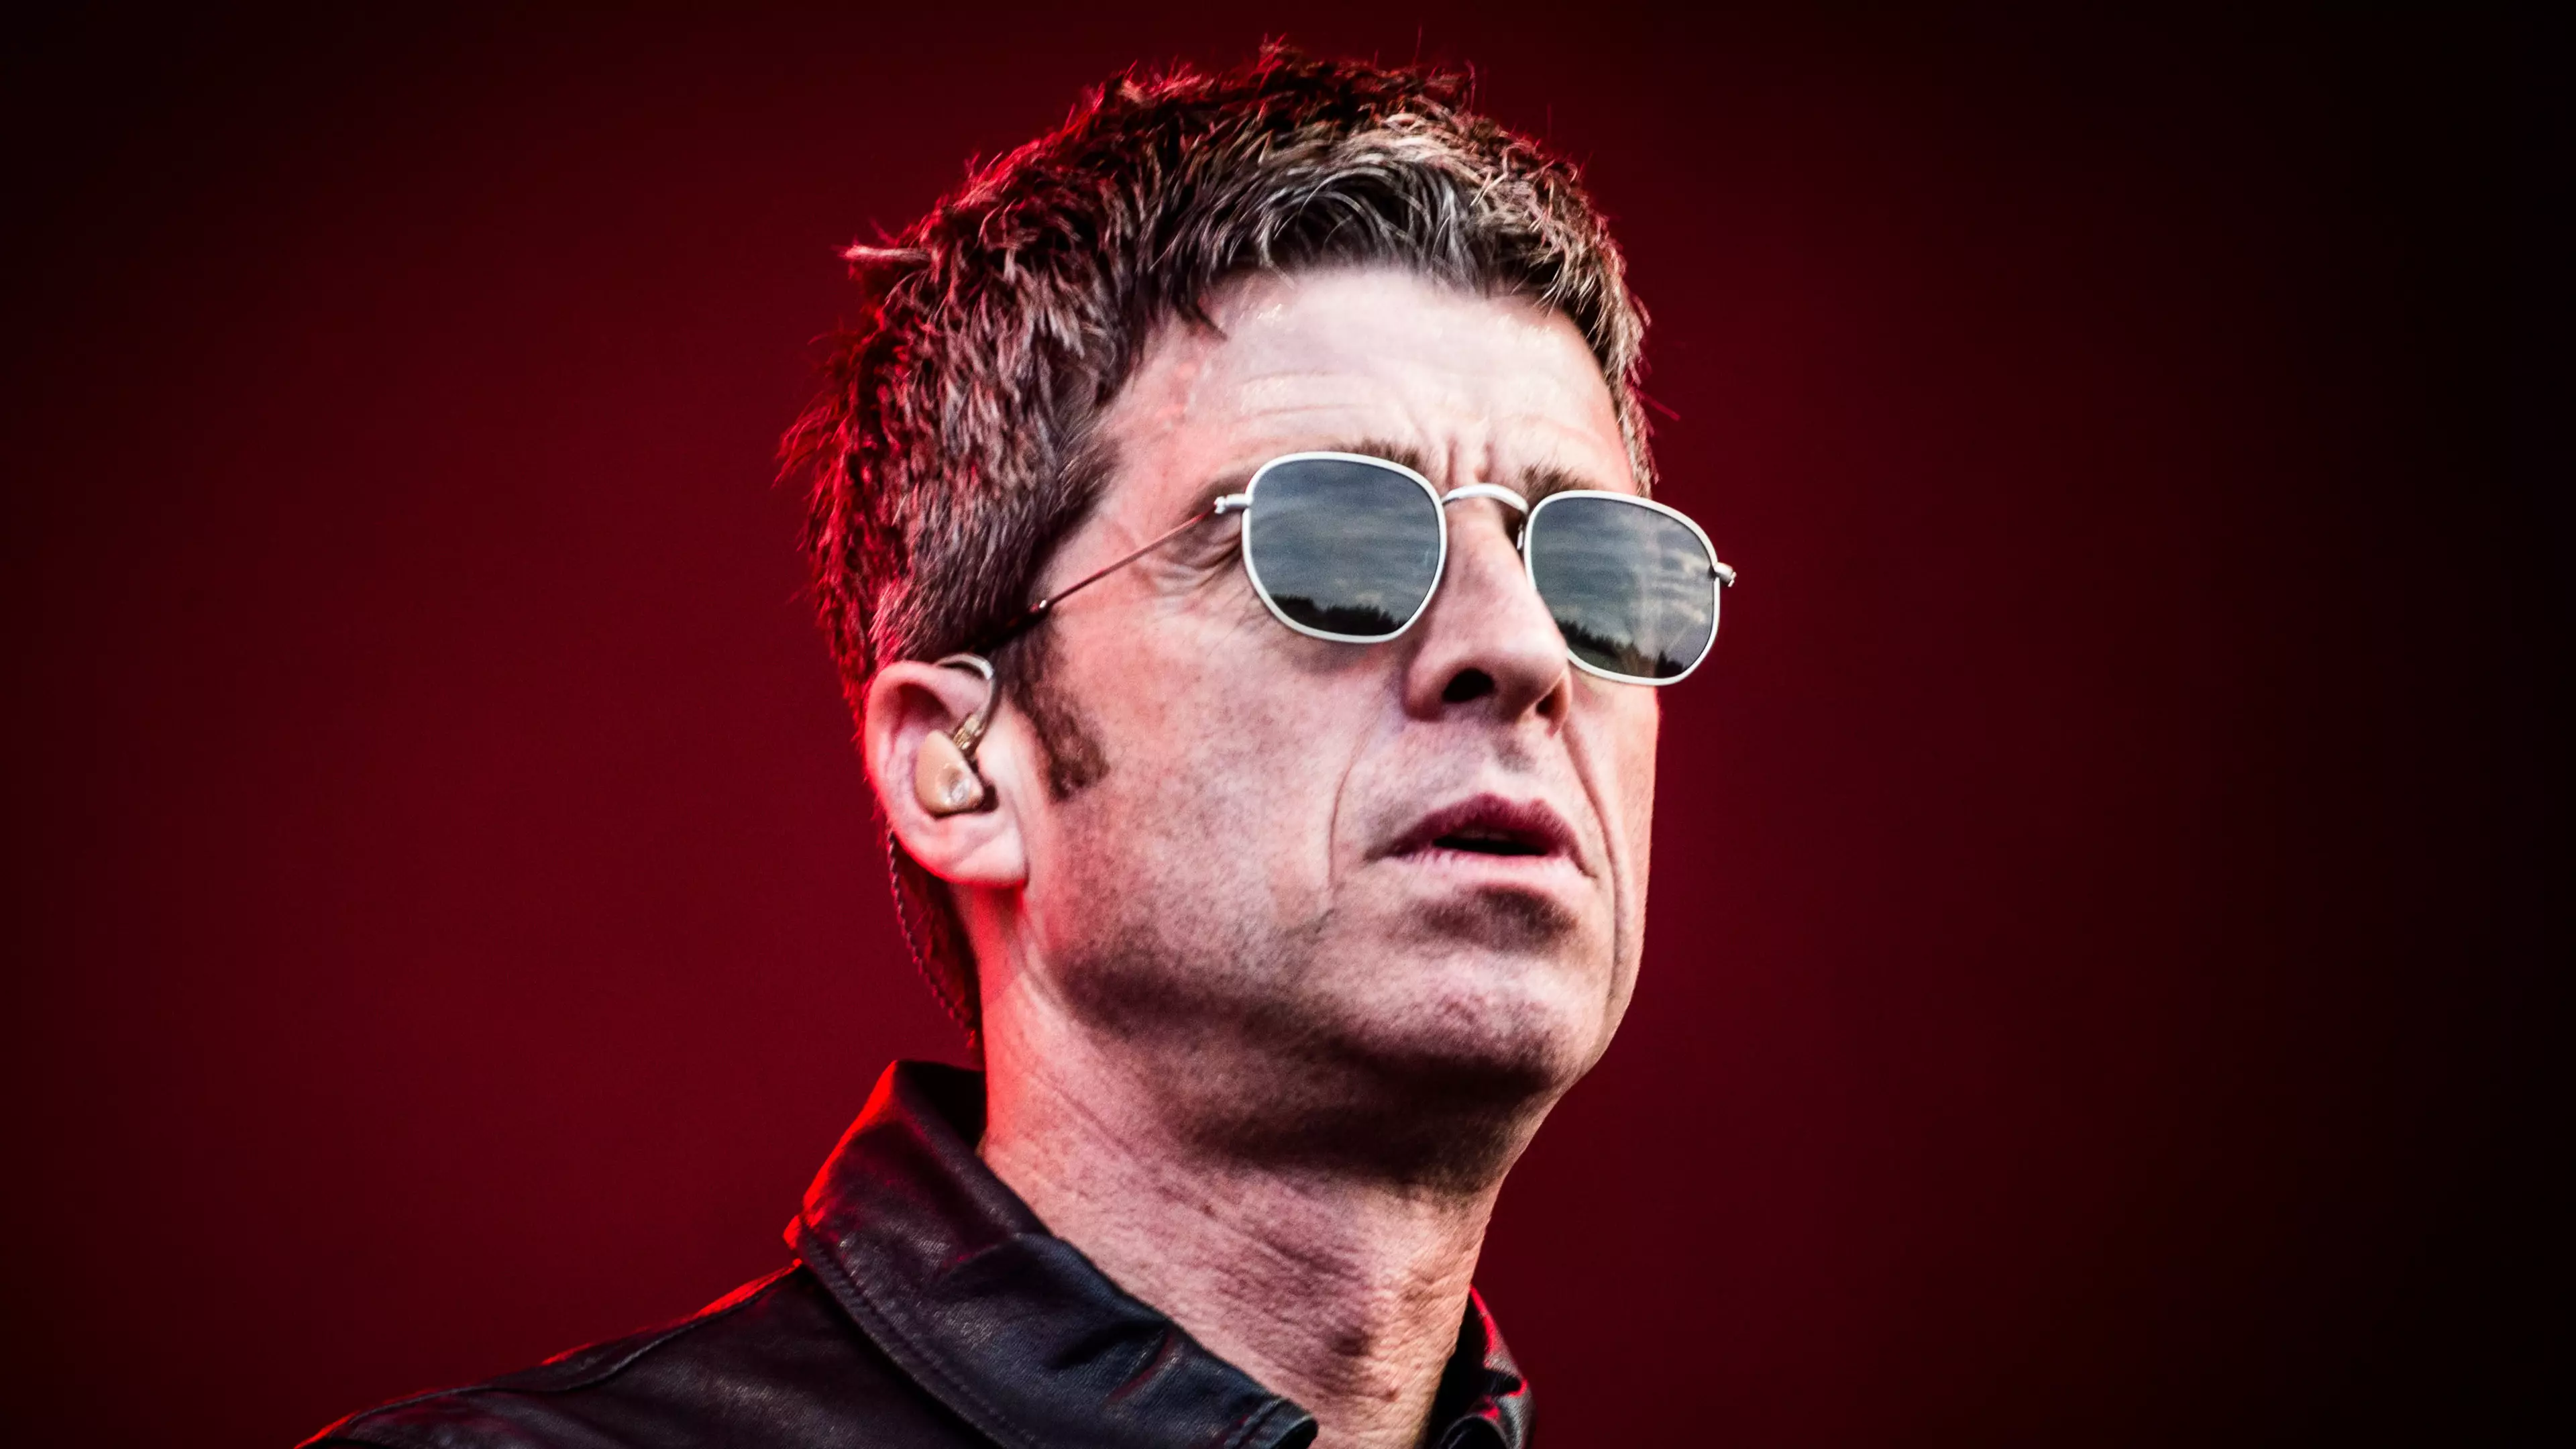 Noel Gallagher's High Flying Birds Announce Manchester Heaton Park Gig in 2019